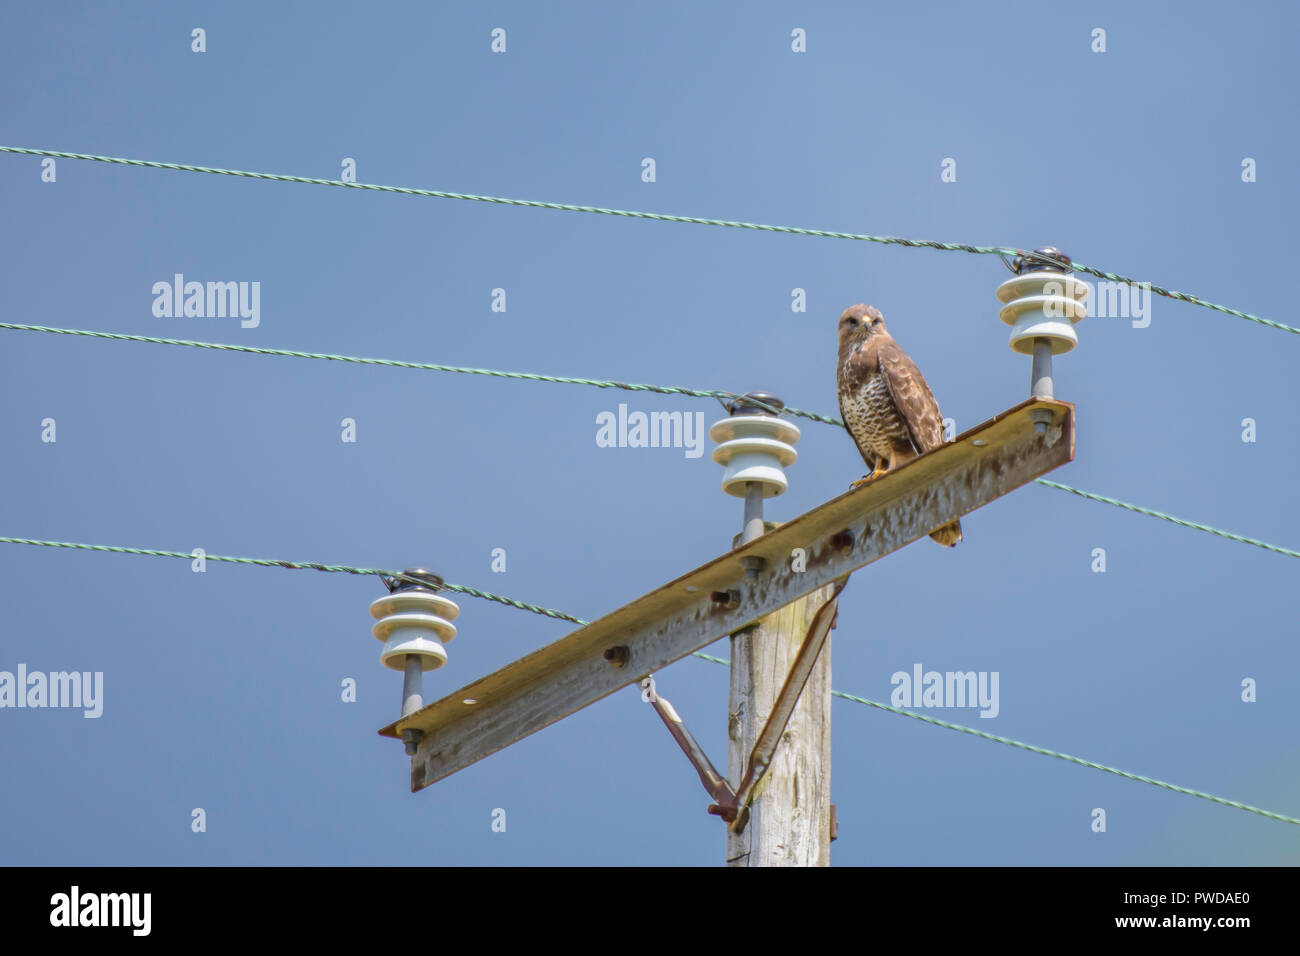 Overlapping human and wildlife habitats.Animal adaptation to changes in environment.Buzzard perching on electricity pylon using it as observation point Stock Photo